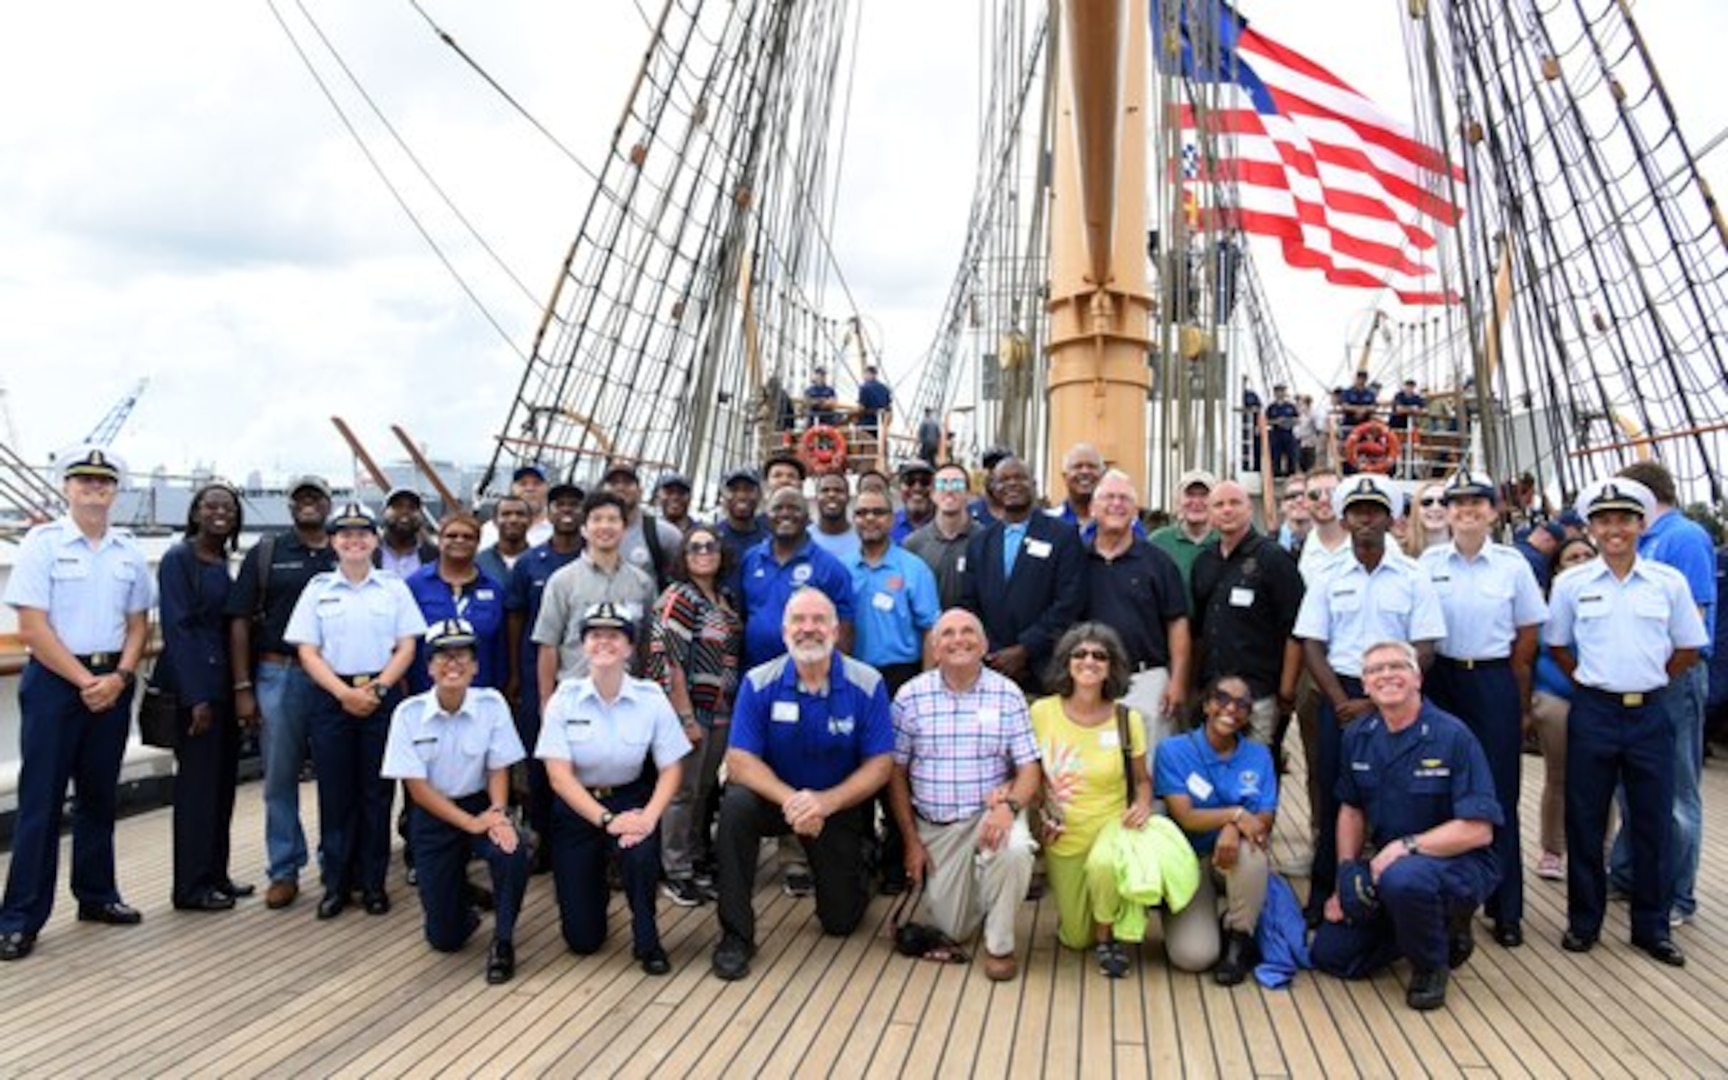 The Coast Guard Cutter Barque Eagle's crew gather with local community and industry members for a group photo on the deck of the Eagle Aug. 3, 2018 in Norfolk, Virginia. The local community and industry members consisted of people from Minority Serving Institutions, Norfolk State University, Elizabeth City State University, Hampton University and Virginia State University. U.S. Coast Guard Photo by Cmdr. Ann Bassolino.